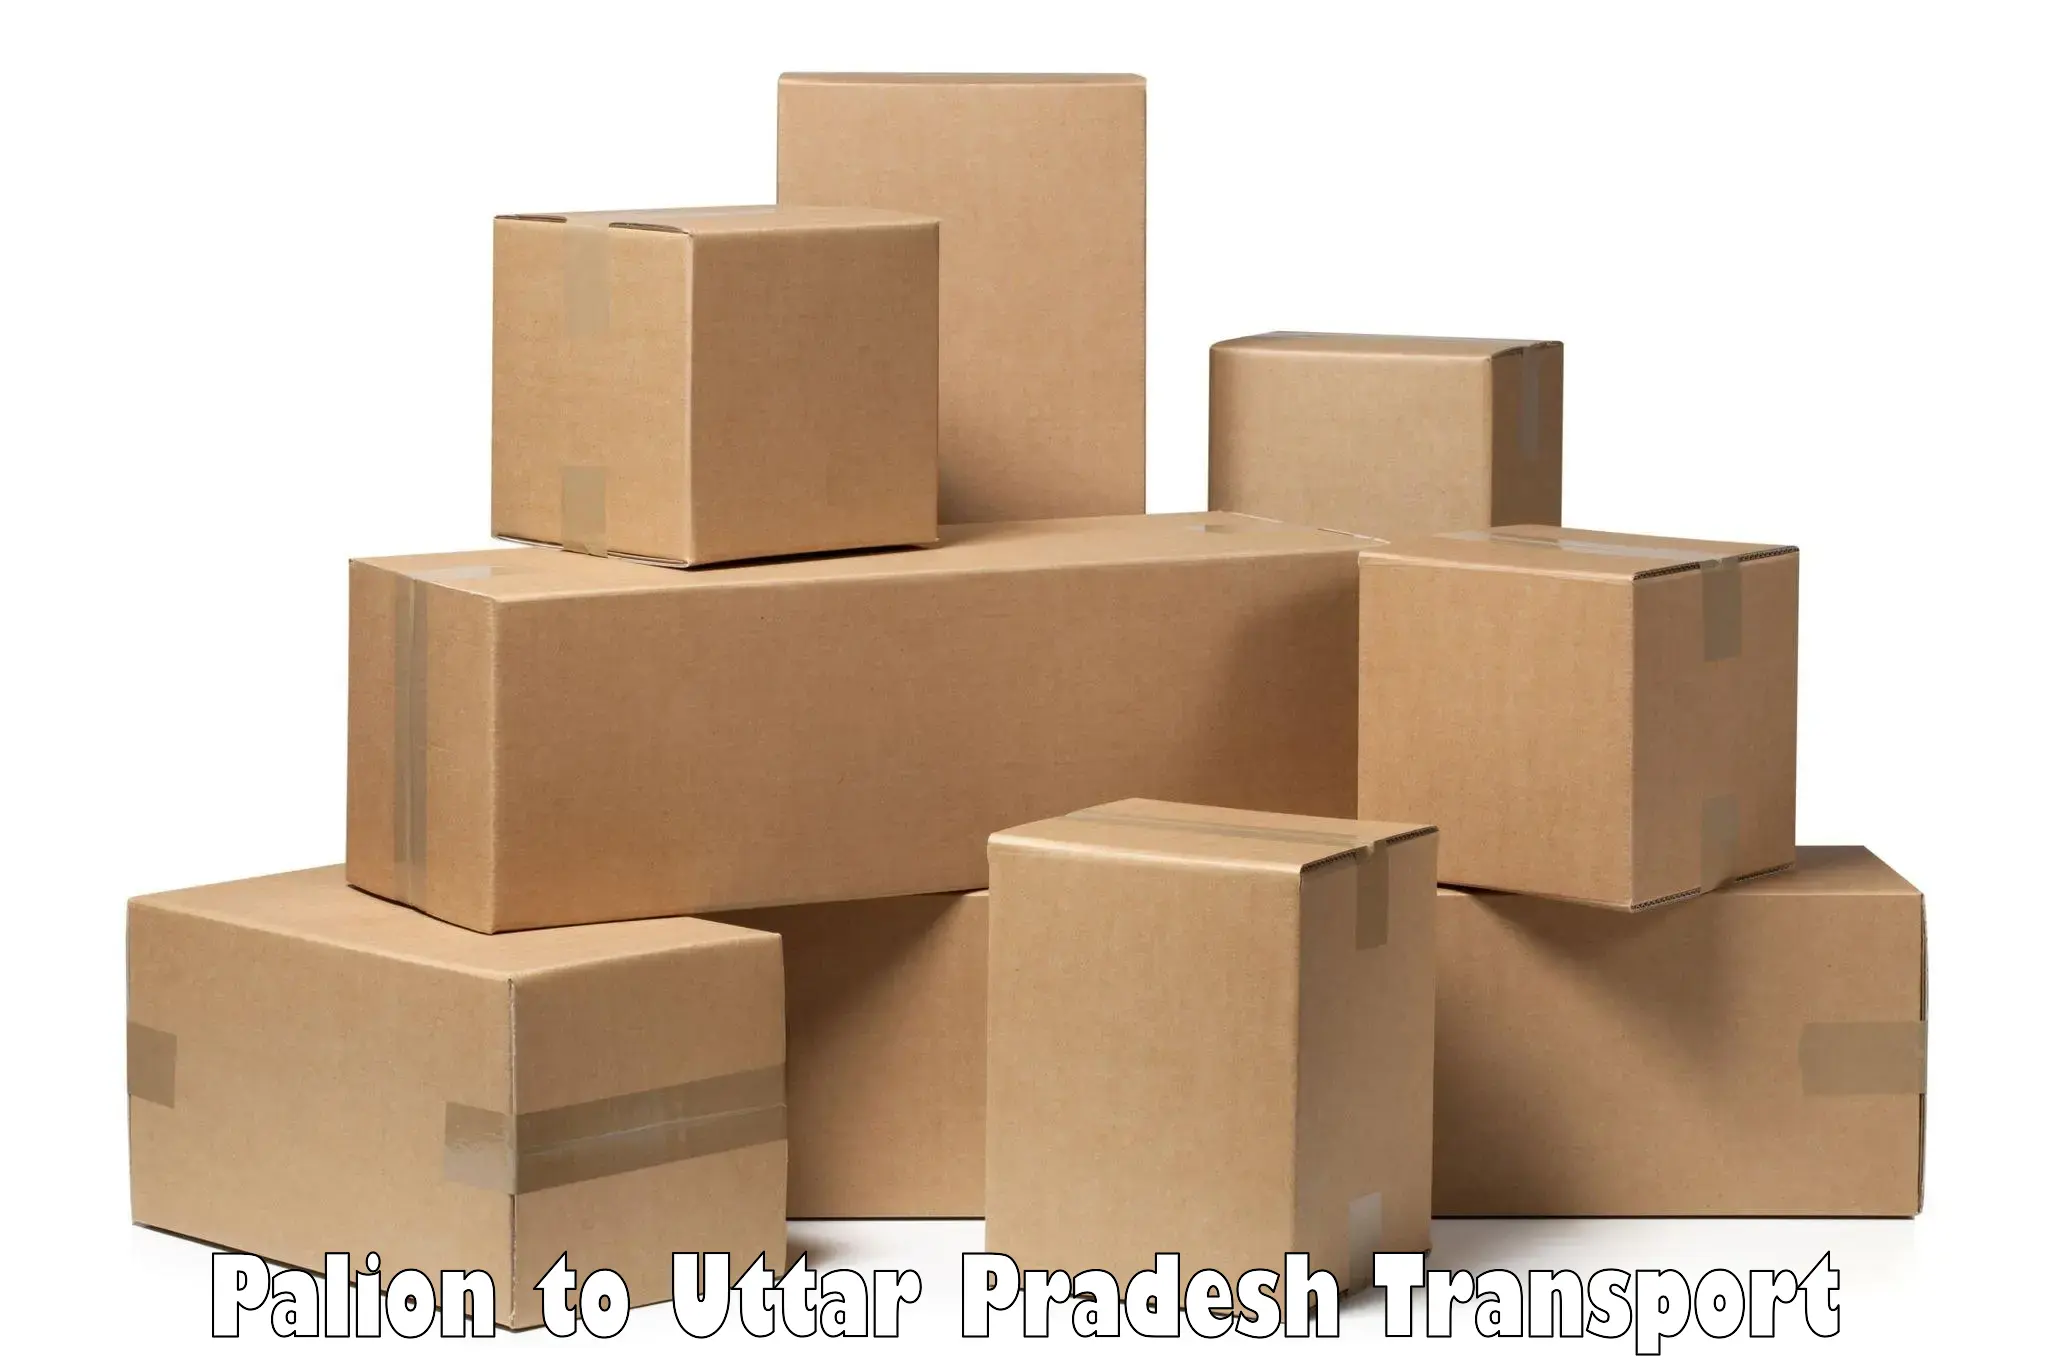 Road transport online services Palion to Anpara